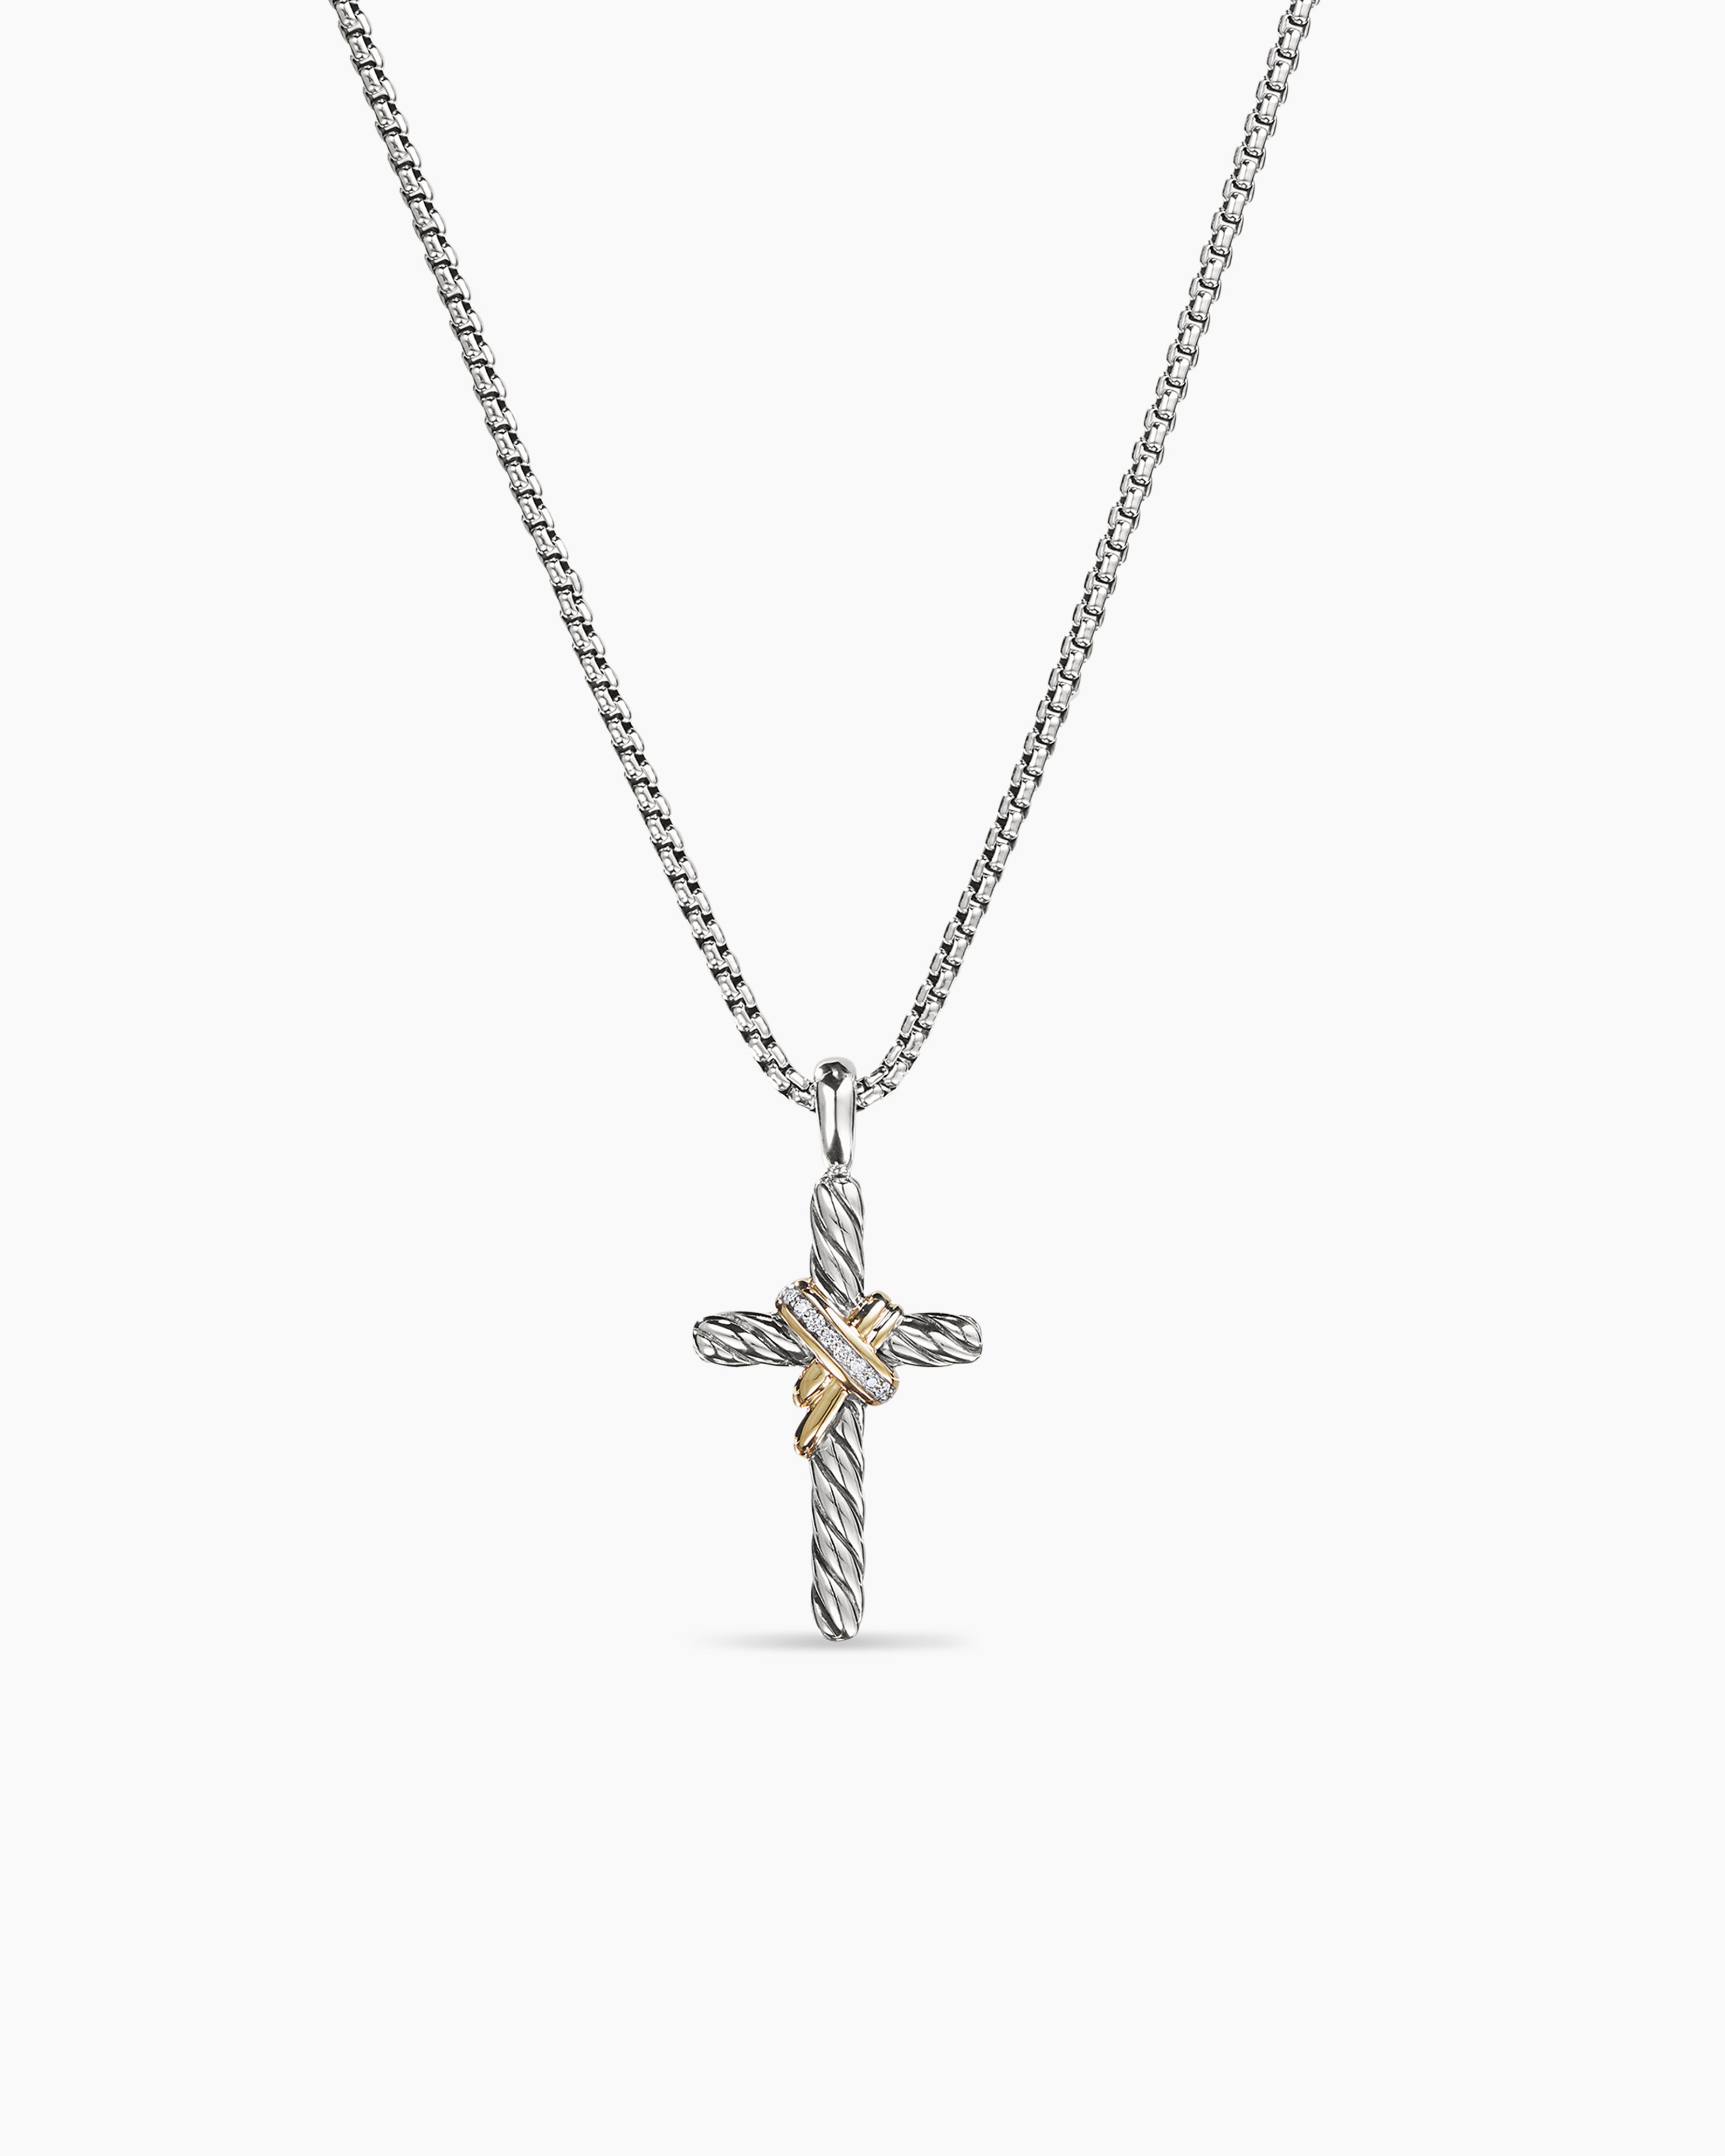 X Cross Necklace in Sterling Silver with 14K Yellow Gold and Diamonds,  31.7mm | David Yurman